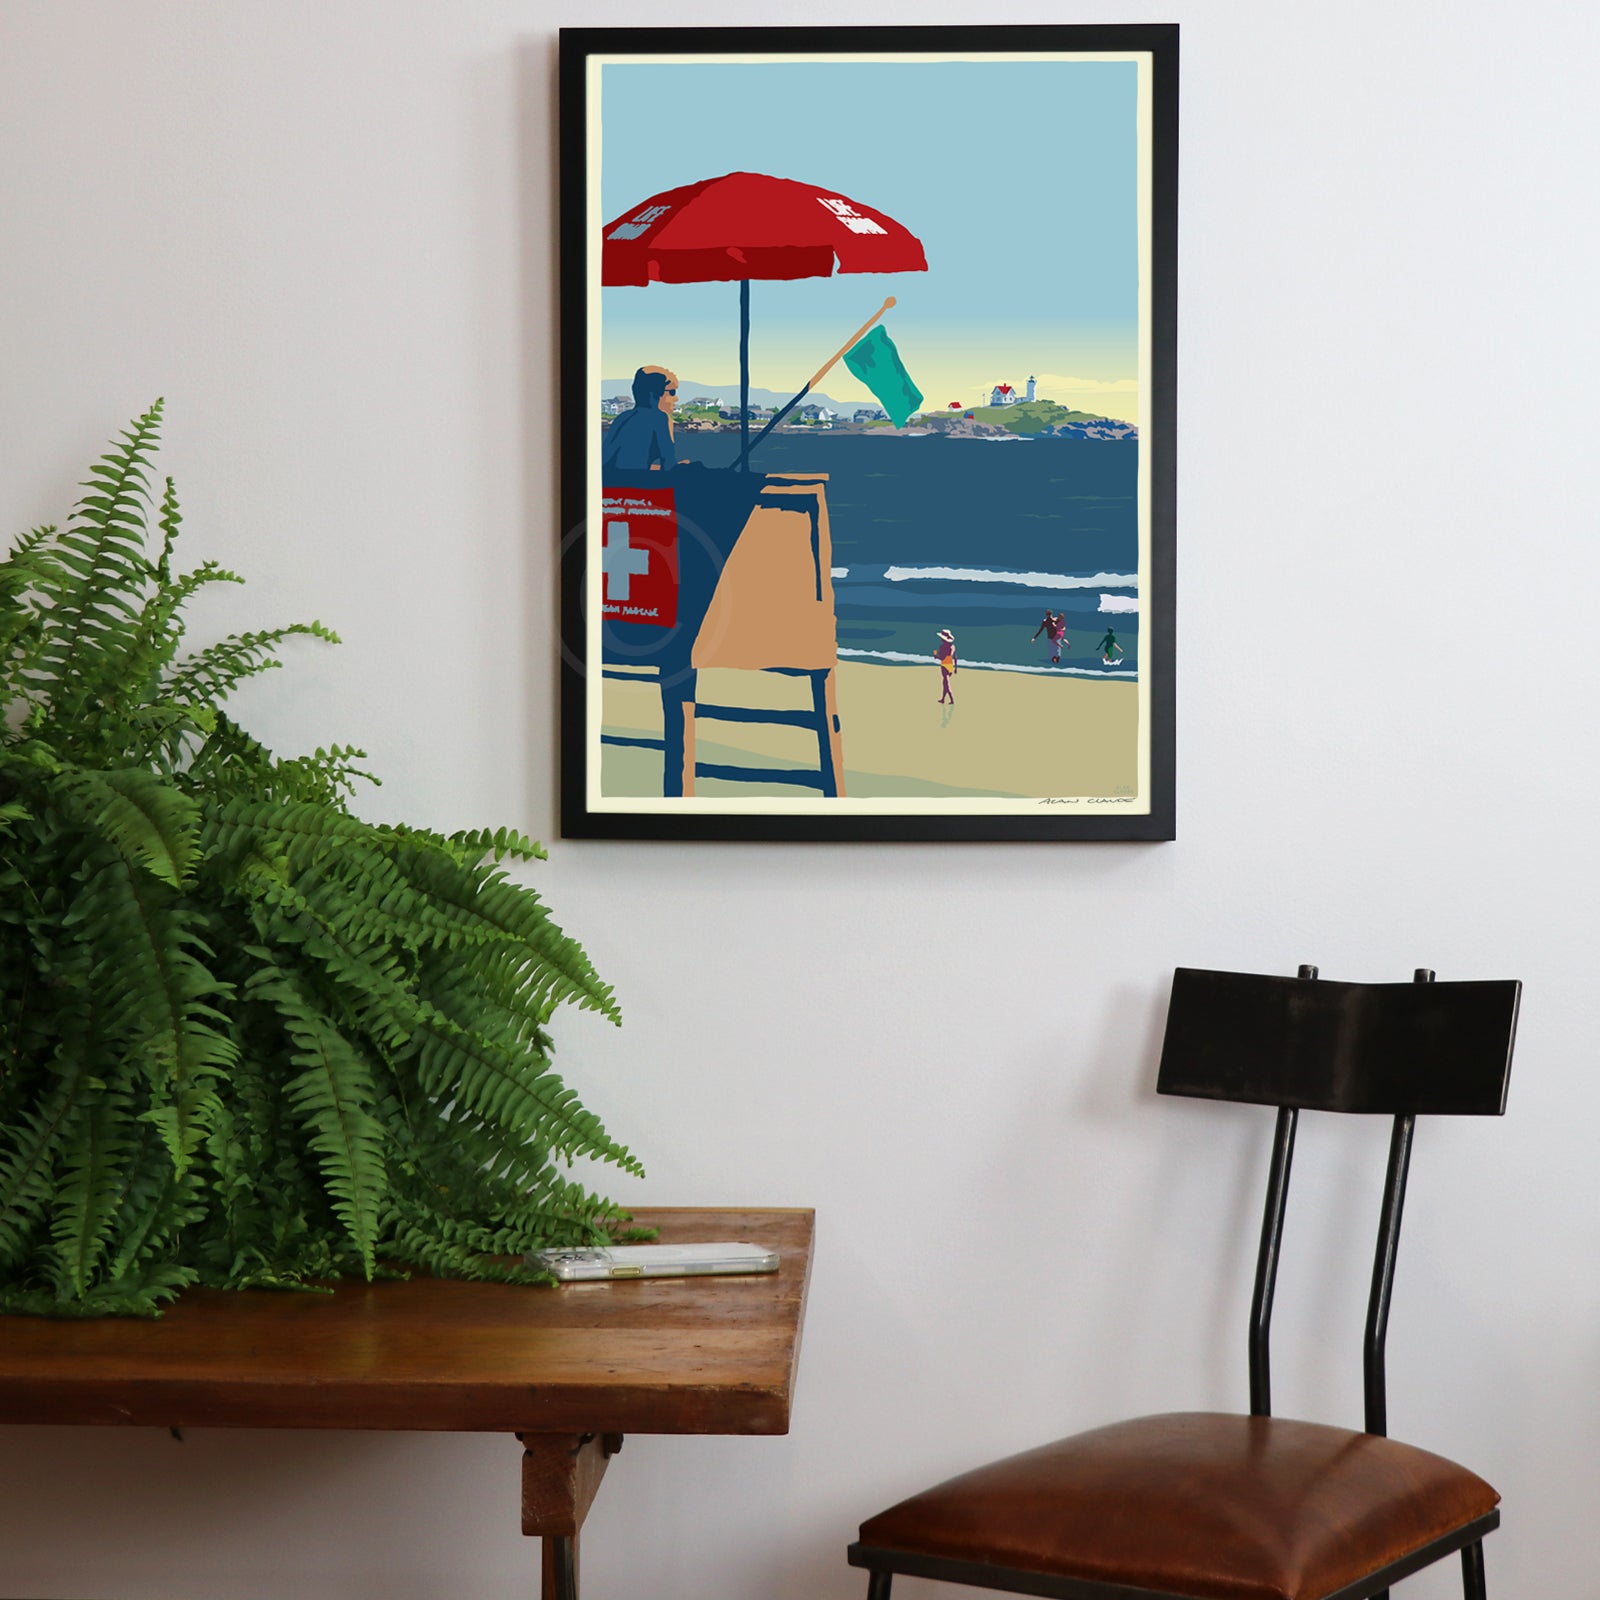 Lifeguard At The Nubble Light Art Print 18" x 24" Framed Wall Poster By Alan Claude - Maine